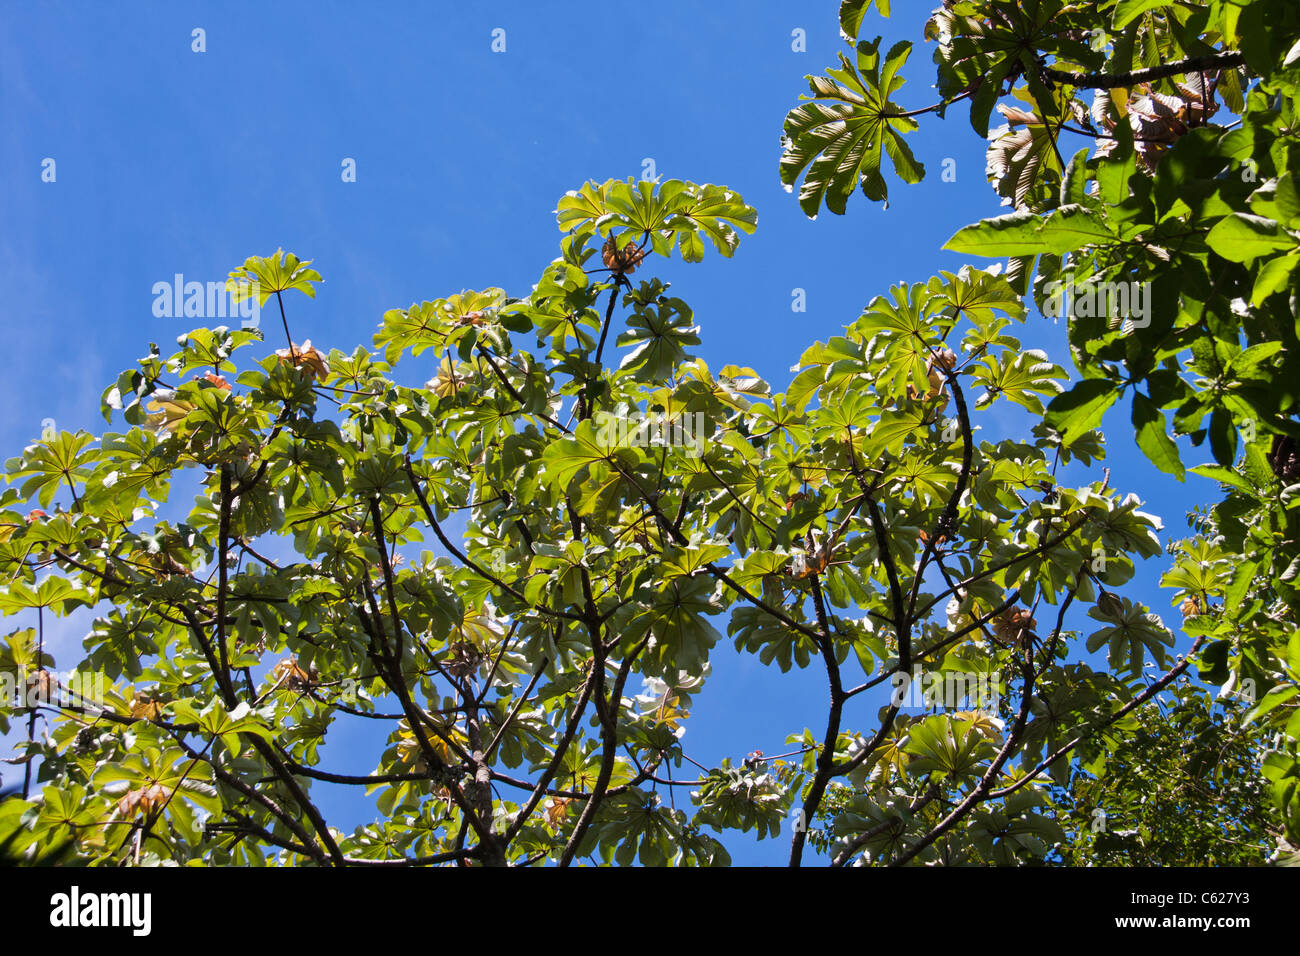 Leaves of Cecropia tree in Costa Rica. Stock Photo